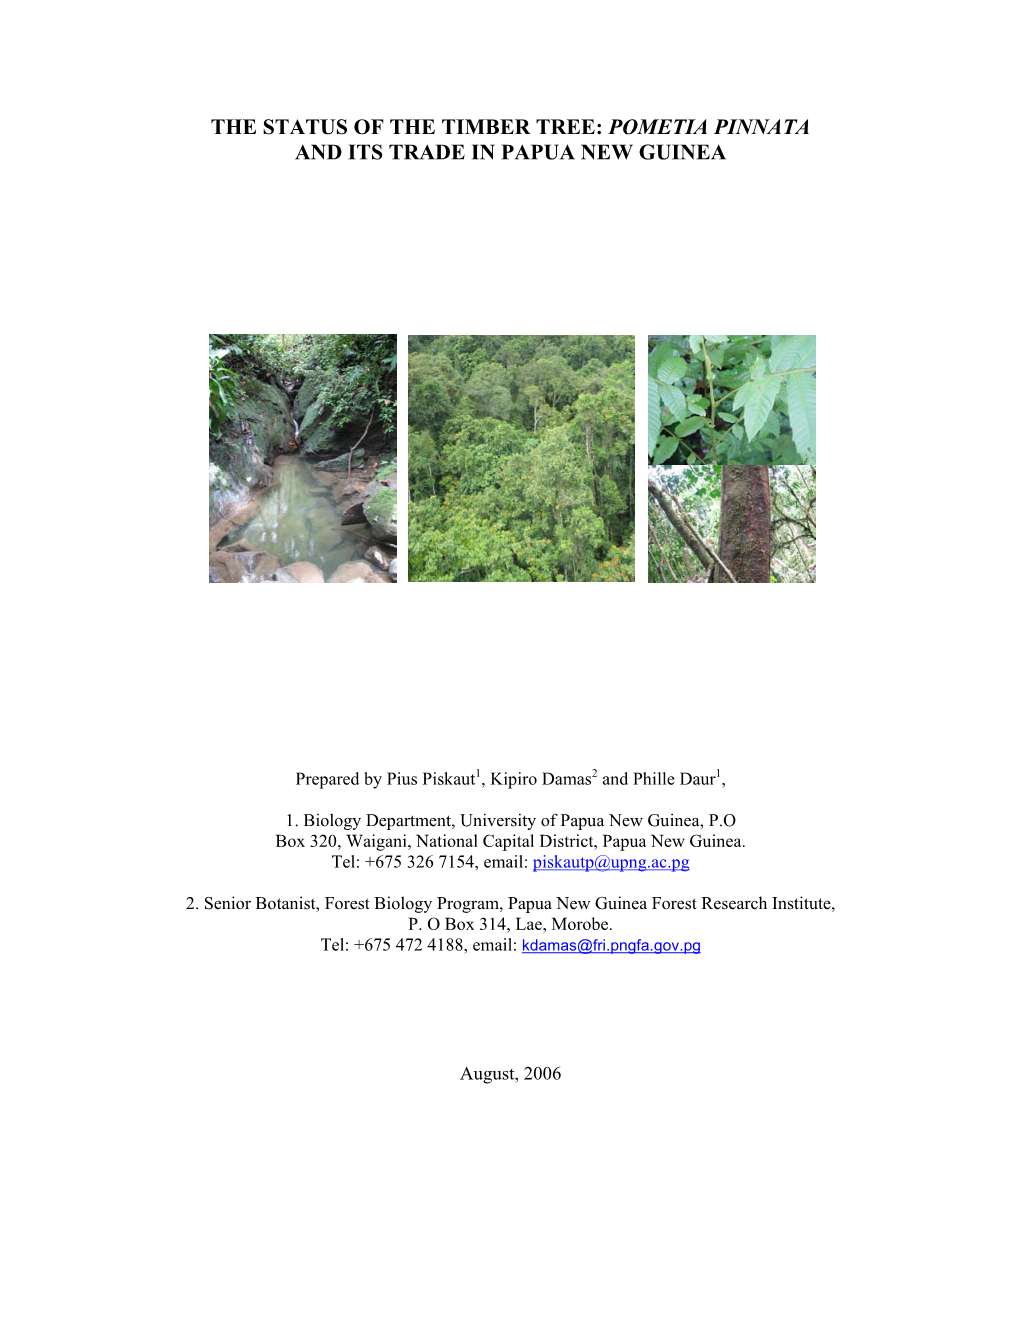 The Status of the Timber Tree: Pometia Pinnata and Its Trade in Papua New Guinea